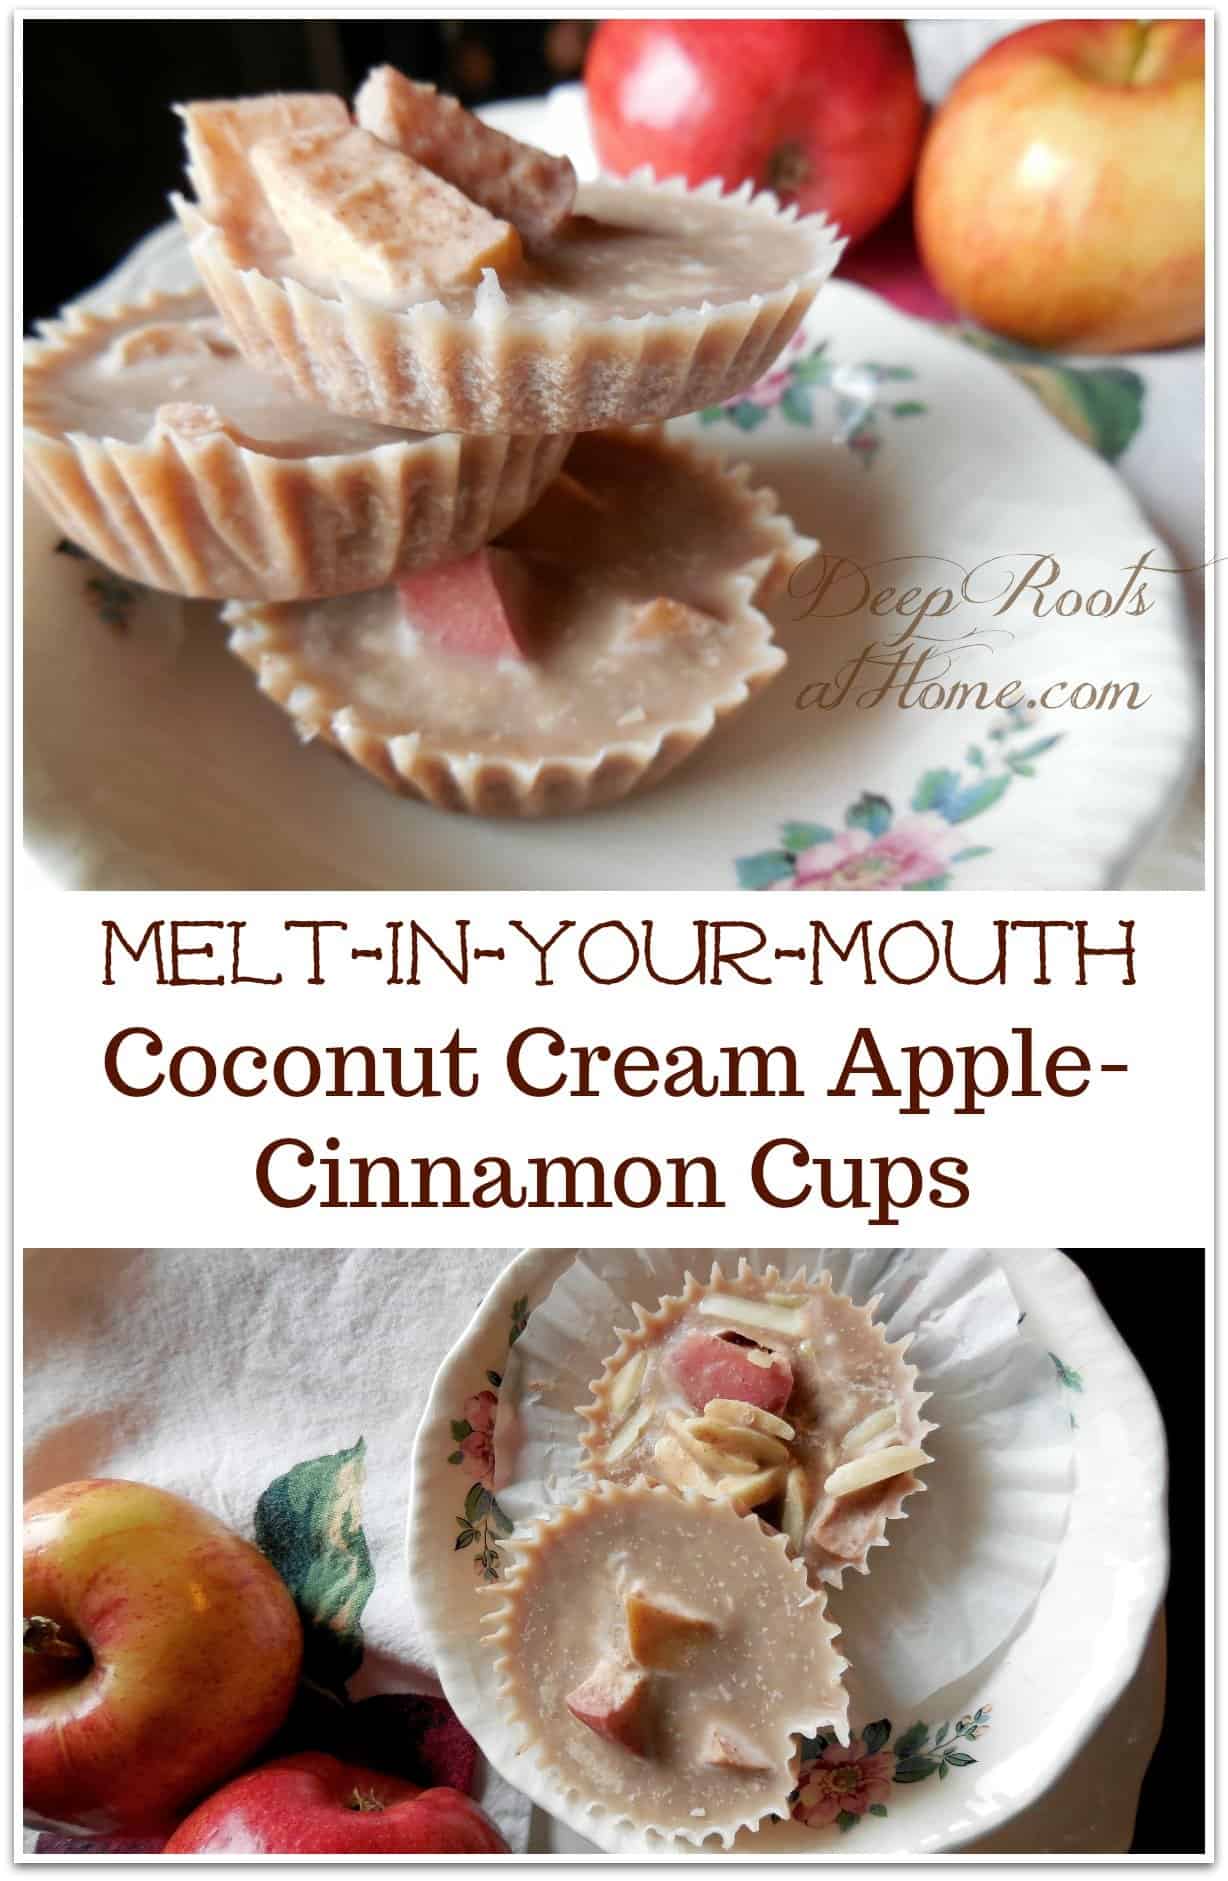 Melt-In-Your-Mouth Coconut Cream Apple-Cinnamon Cups